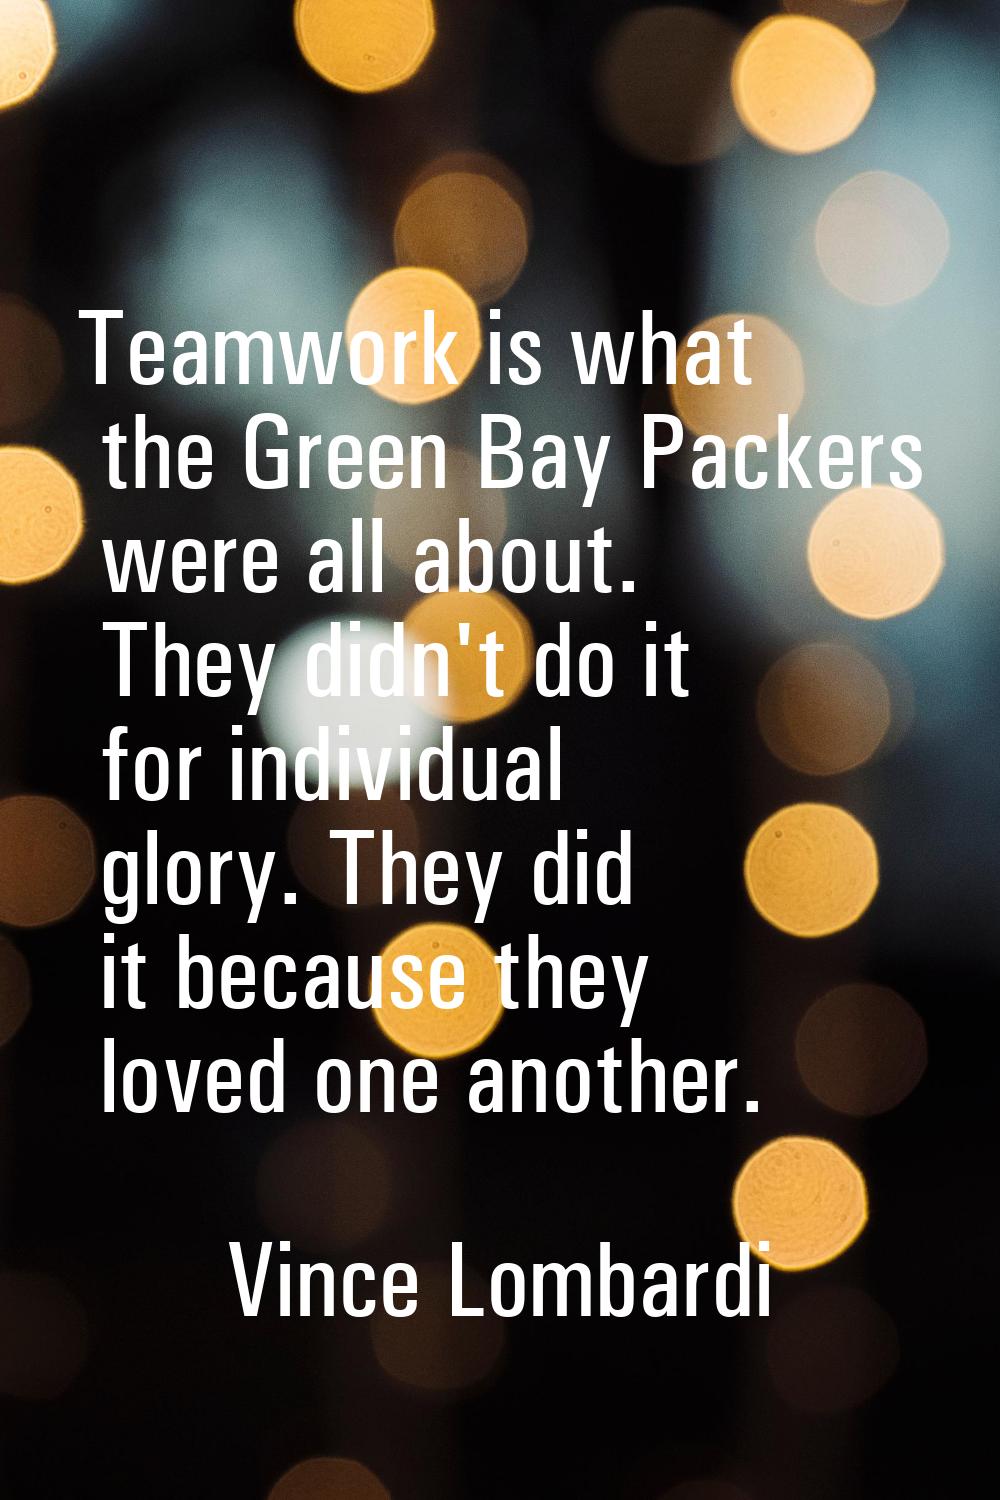 Teamwork is what the Green Bay Packers were all about. They didn't do it for individual glory. They